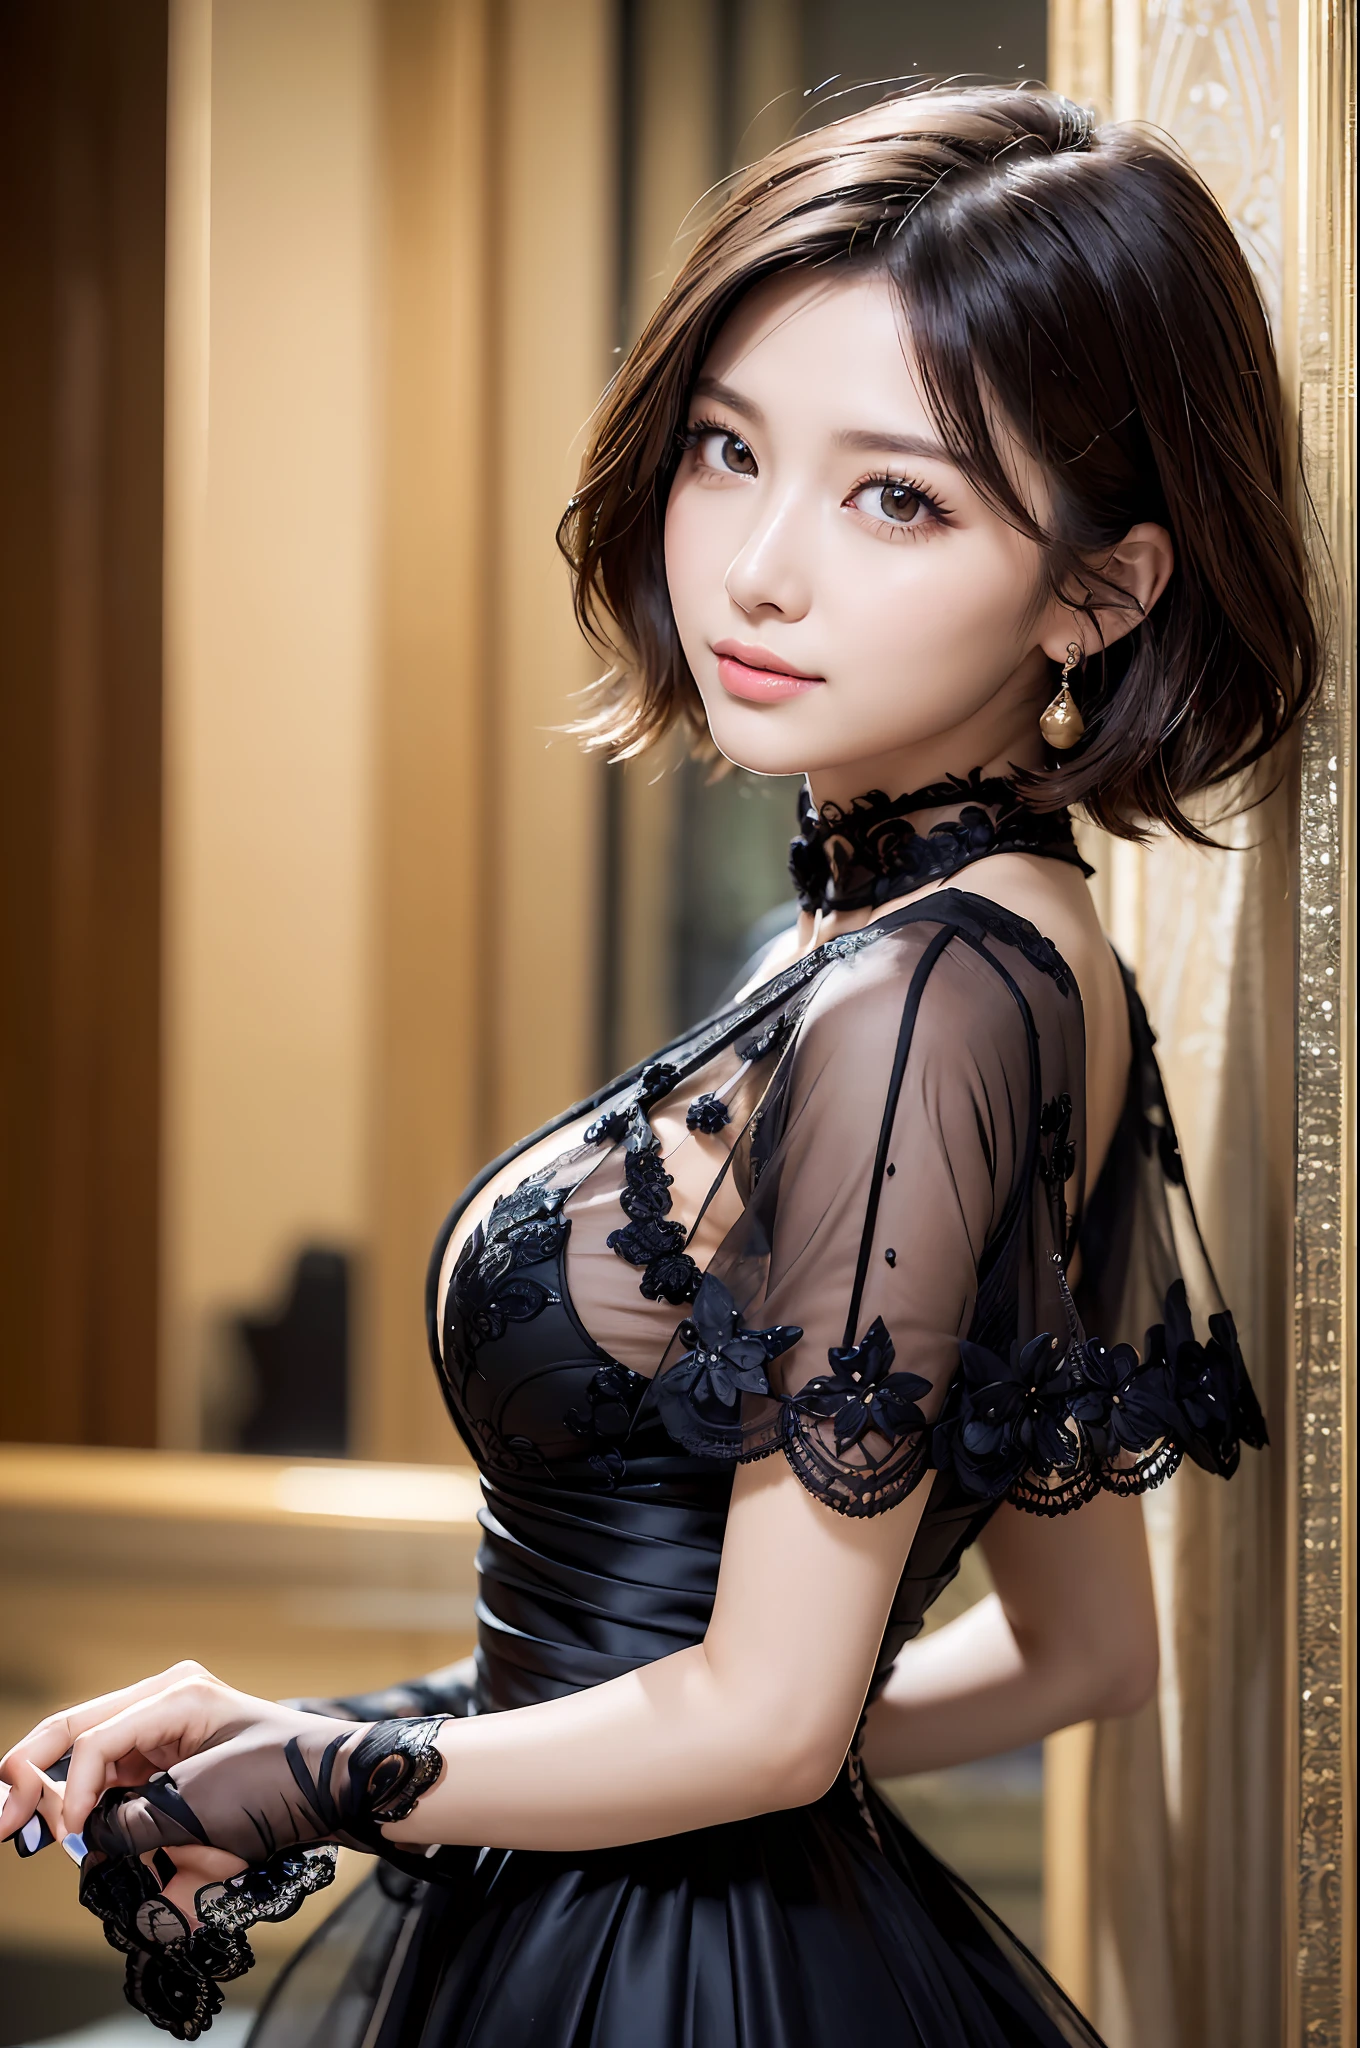 (((((a 20 yo woman, Luxurious dresses, cowboy shot, from side, black very short hair, ))))), ((((masterpiece, best quality, highly detailed, RAW photo, 超A high resolution)))), Highly detailed facial and skin texture, A detailed eye, Crisp focus, an asian young and beautiful girl, de pele branca, Real human skin, oval-face, A person who sees with calm and goddess-like eyes, lipgloss, eye lashes, Gloss Face, Wide range of lighting, Natural shading, slight smile, Clear facial features, beautiful countenance, double eyelids, sagging eyes, Large rooms in luxury hotels, floral arrangements